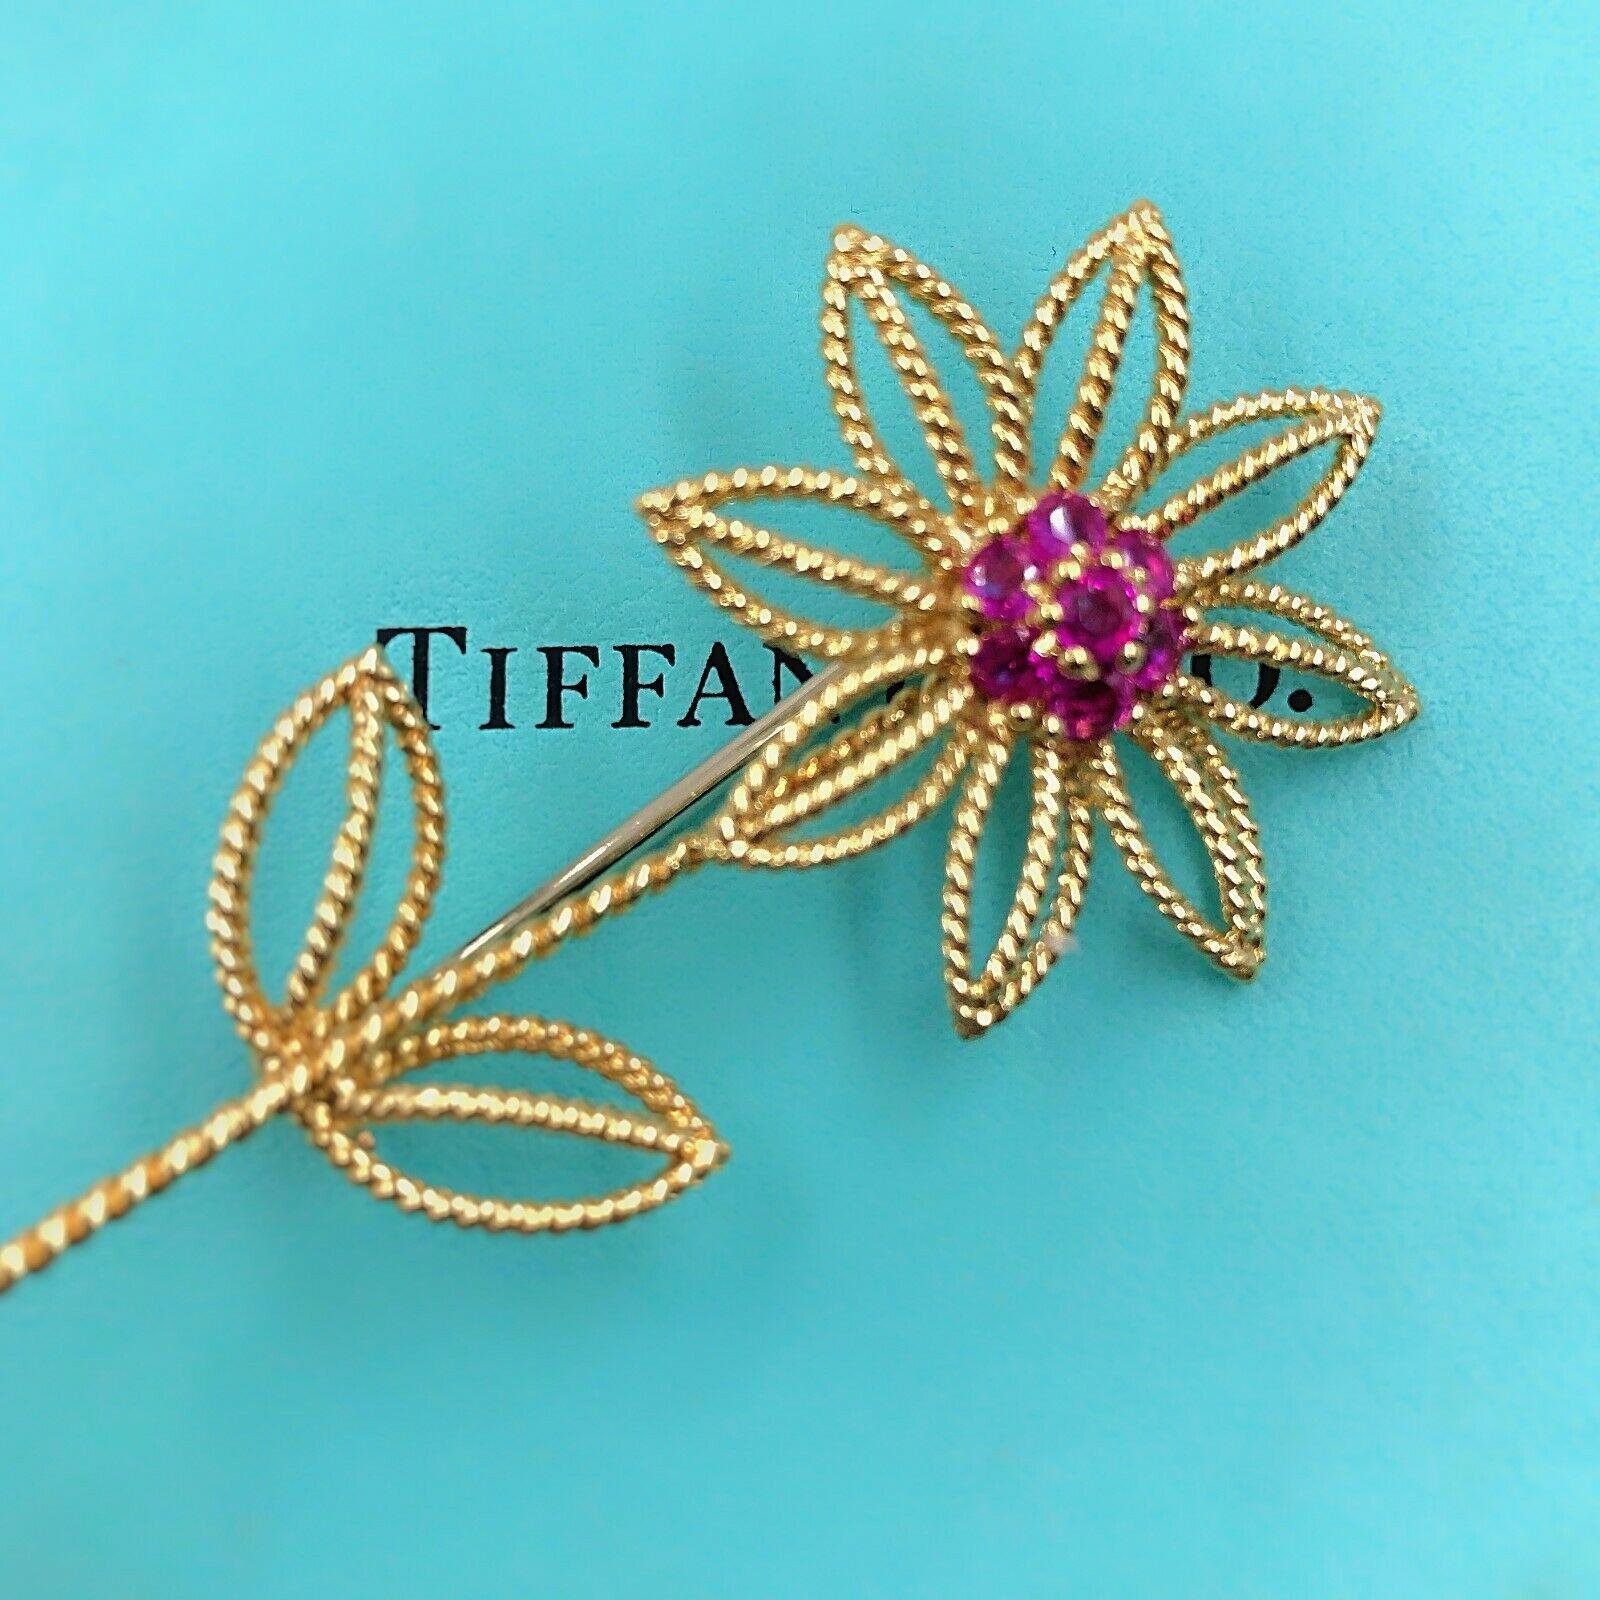 Women's or Men's Authentic Vintage 1960s Tiffany & Co 18 Karat Gold Flower Brooch with Rubies